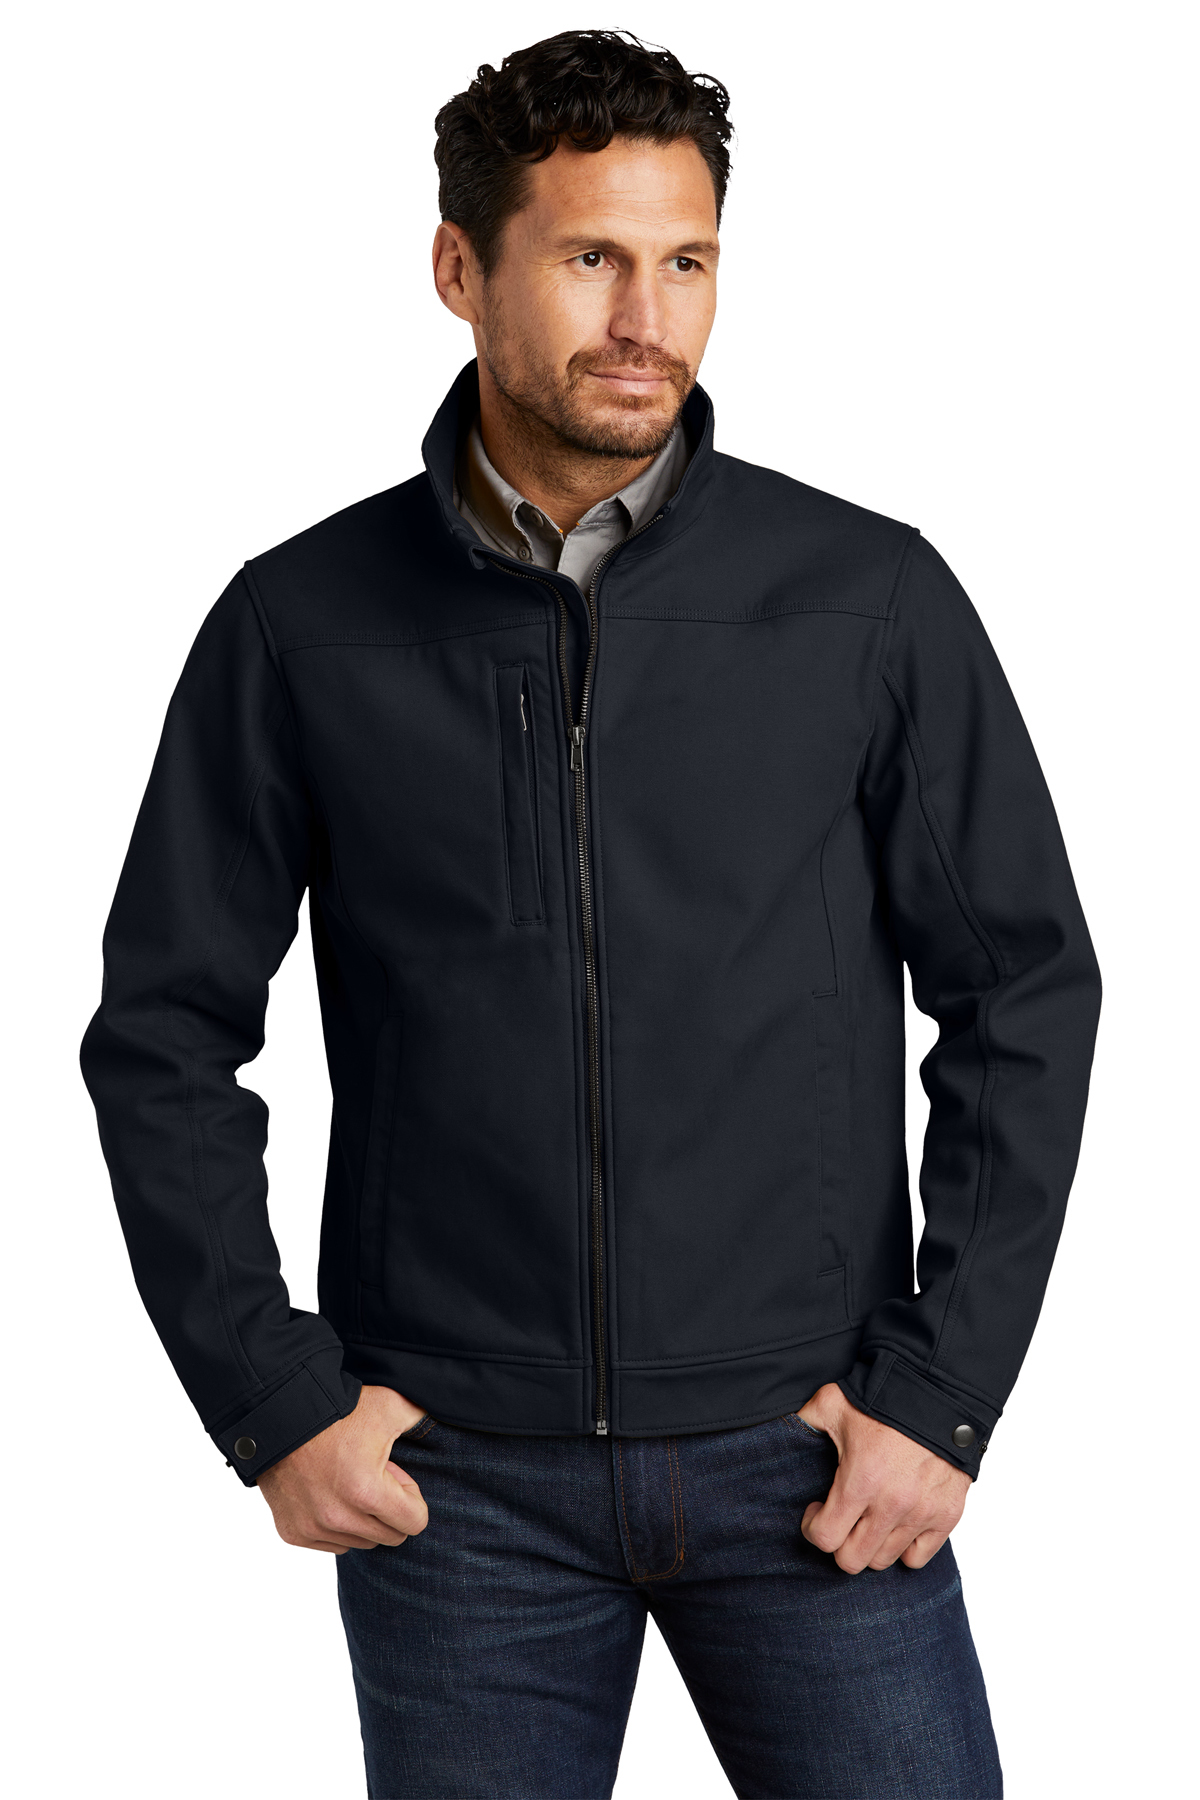 CornerStone Duck Bonded Soft Shell Jacket | Product | Company Casuals